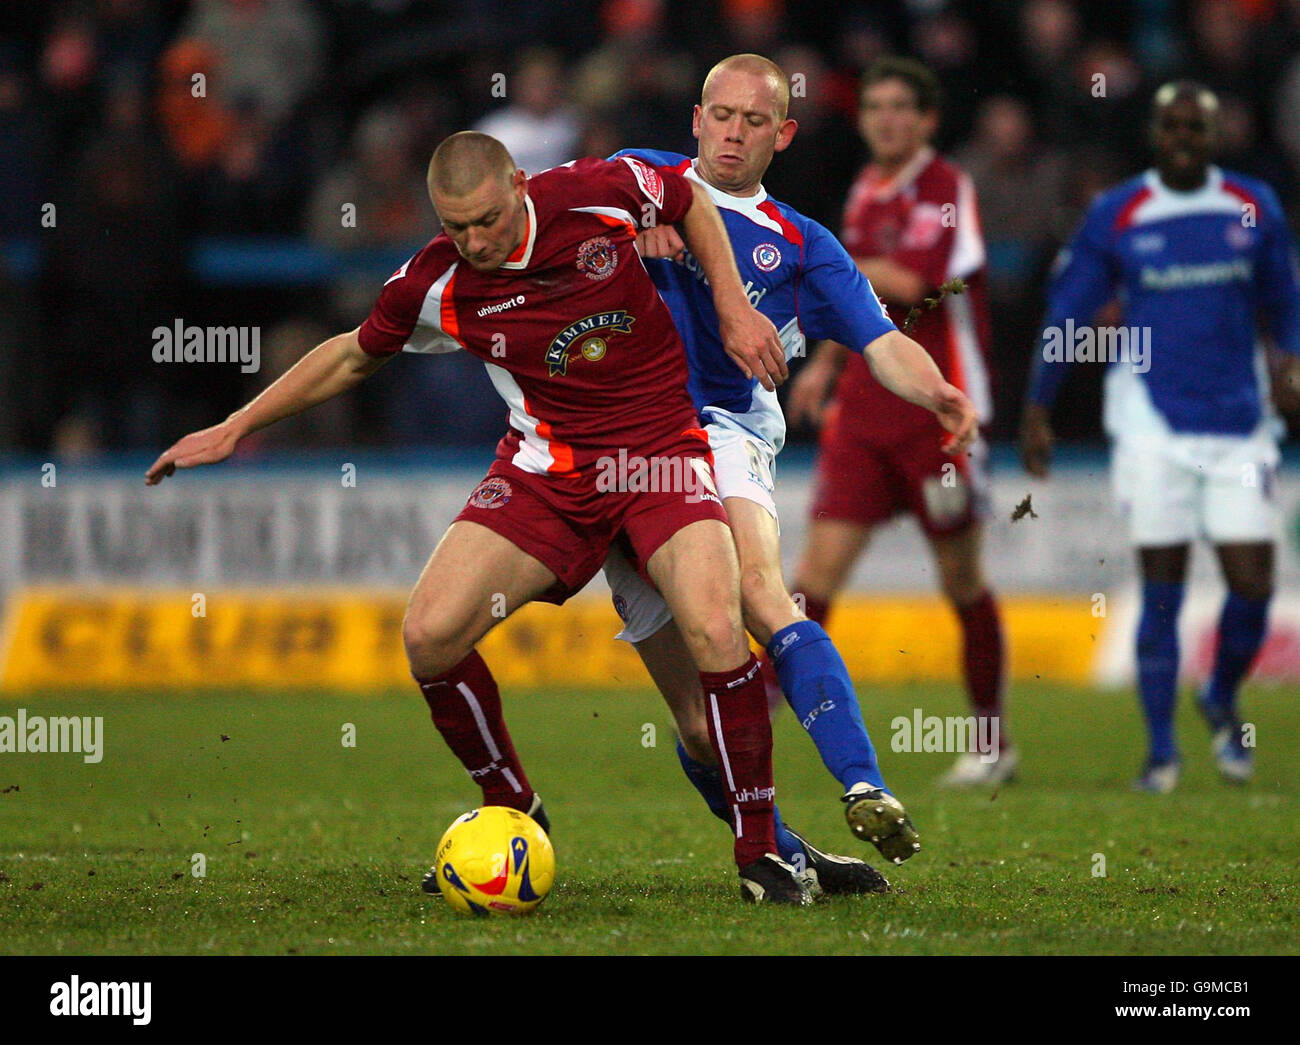 Chesterfield's Derek Niven challenges Blackpool's Andy Wilkinson (front) during the Coca-Cola League One match at the Recreation Ground, Chesterfield. Stock Photo